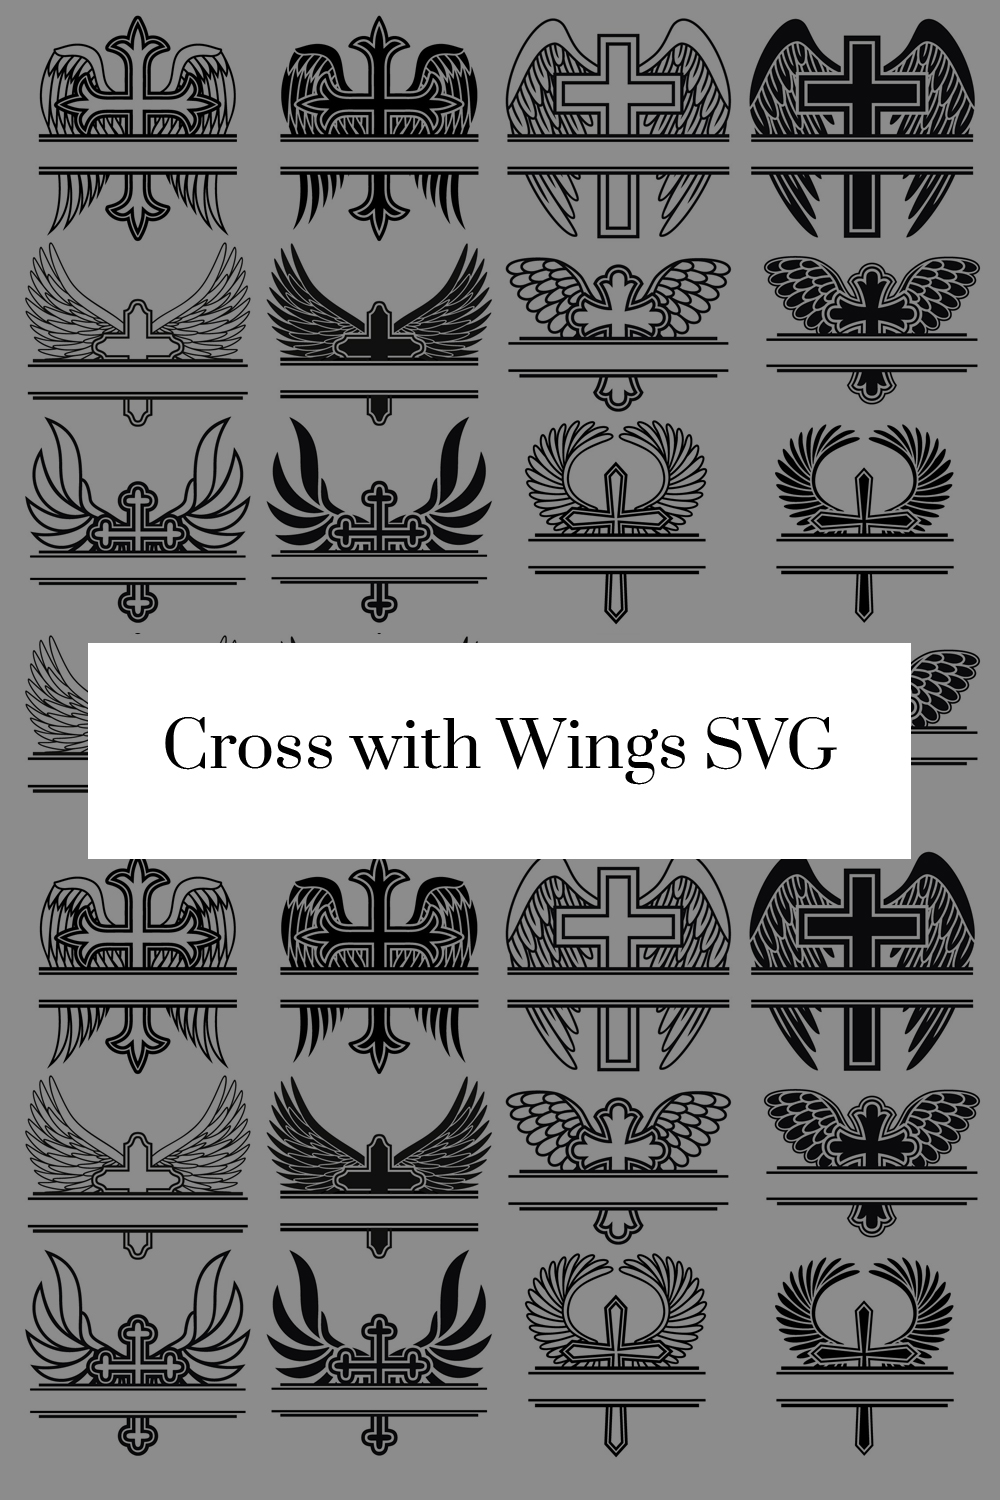 Black and white images with crosses with angel wings.